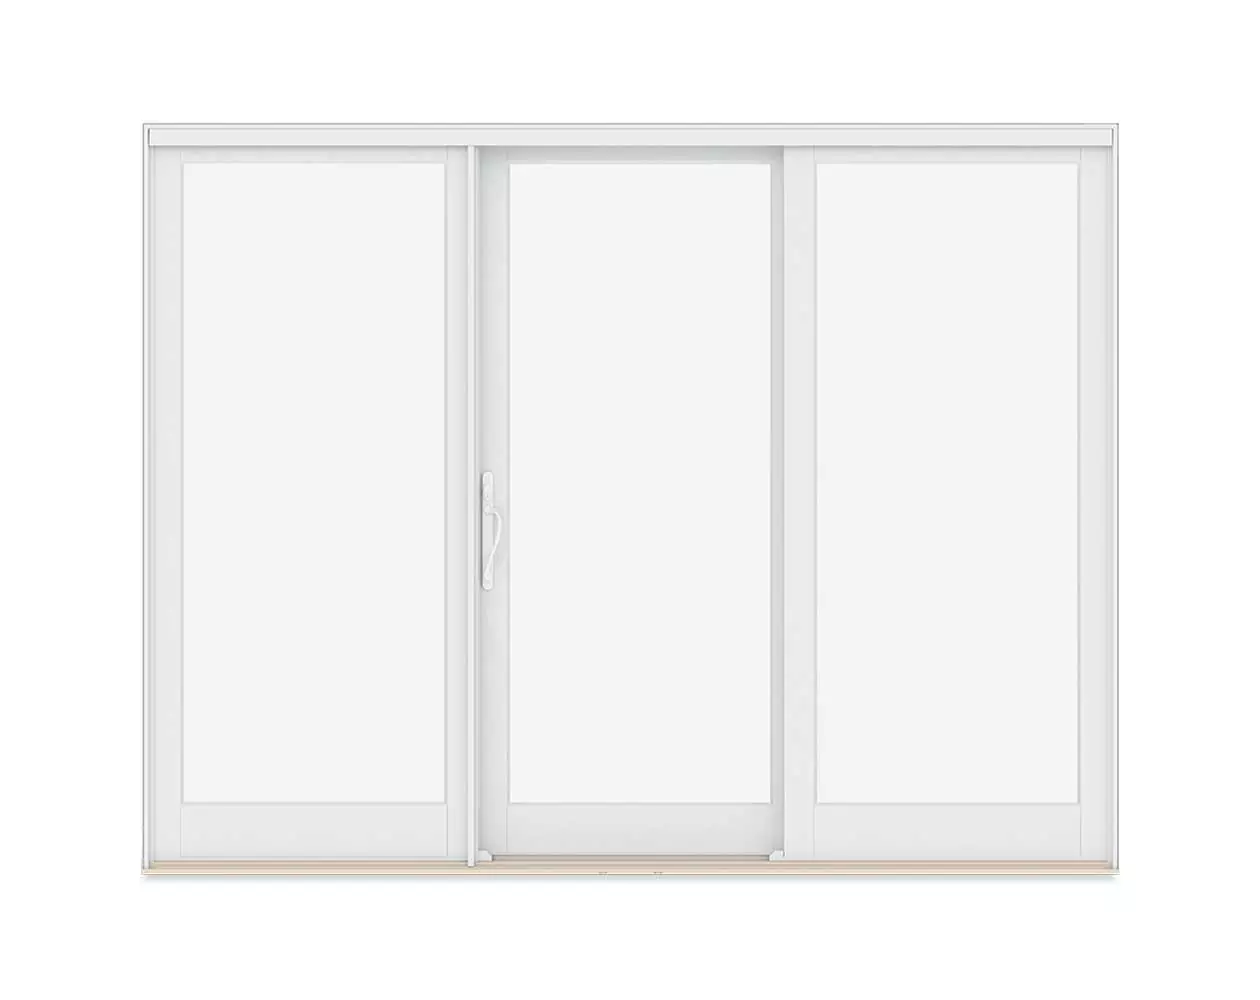 Three-Panel Sliding French door with operating center unit